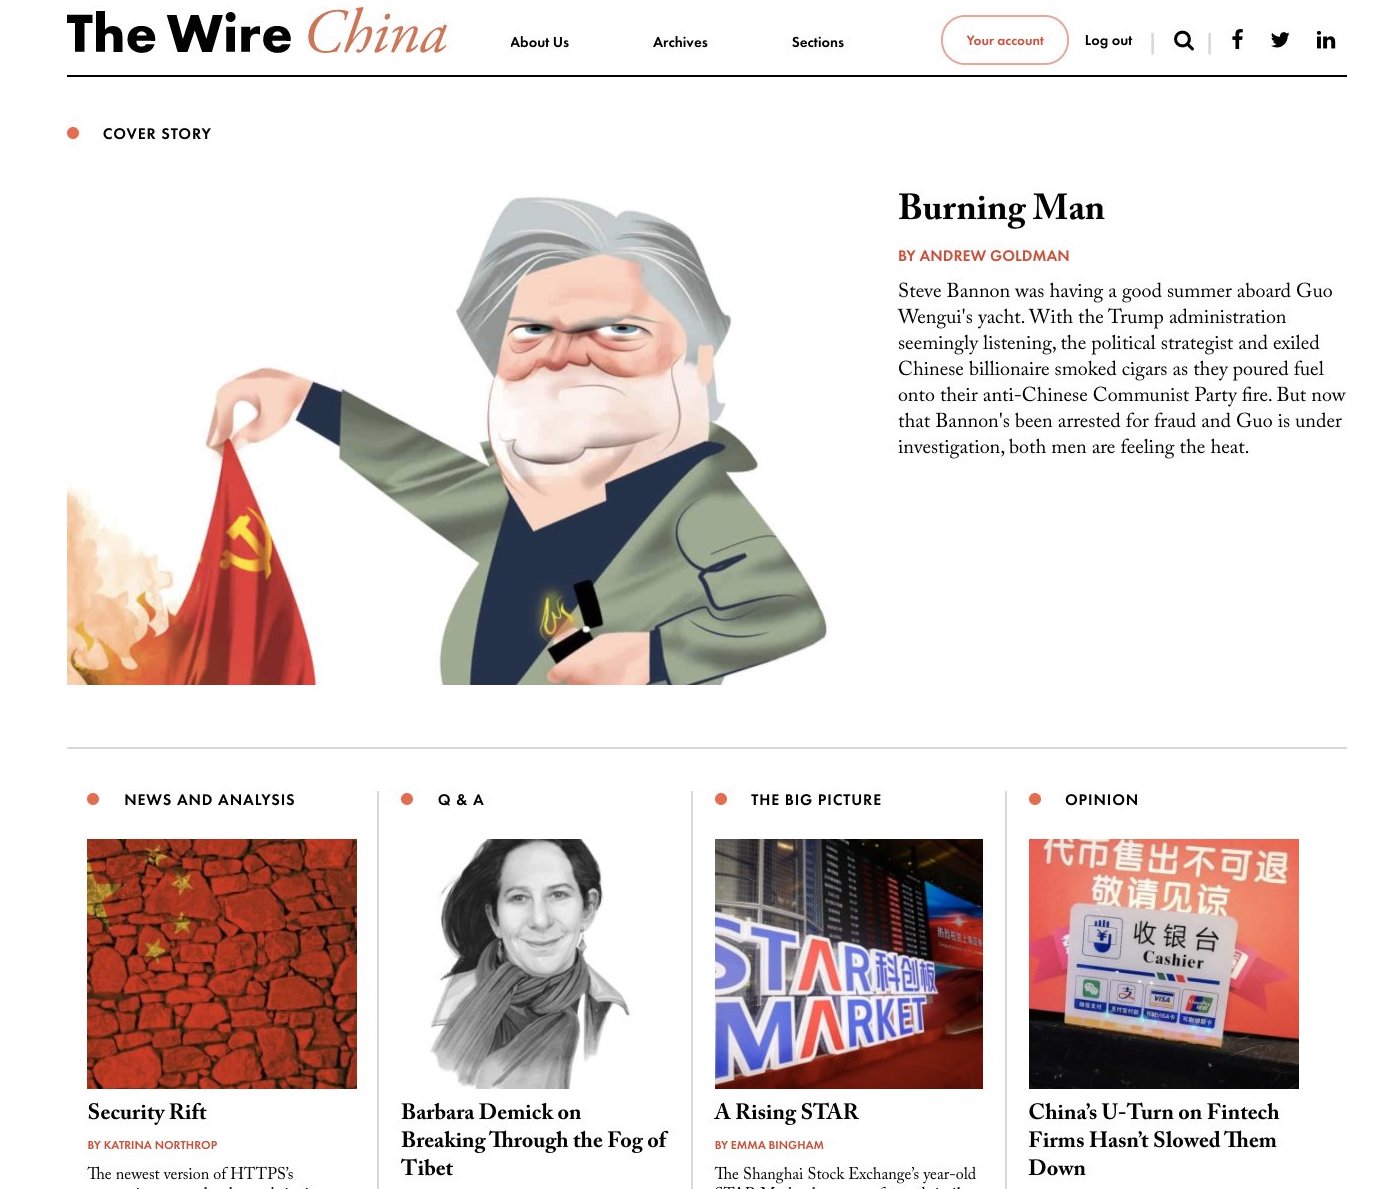 The Wire website